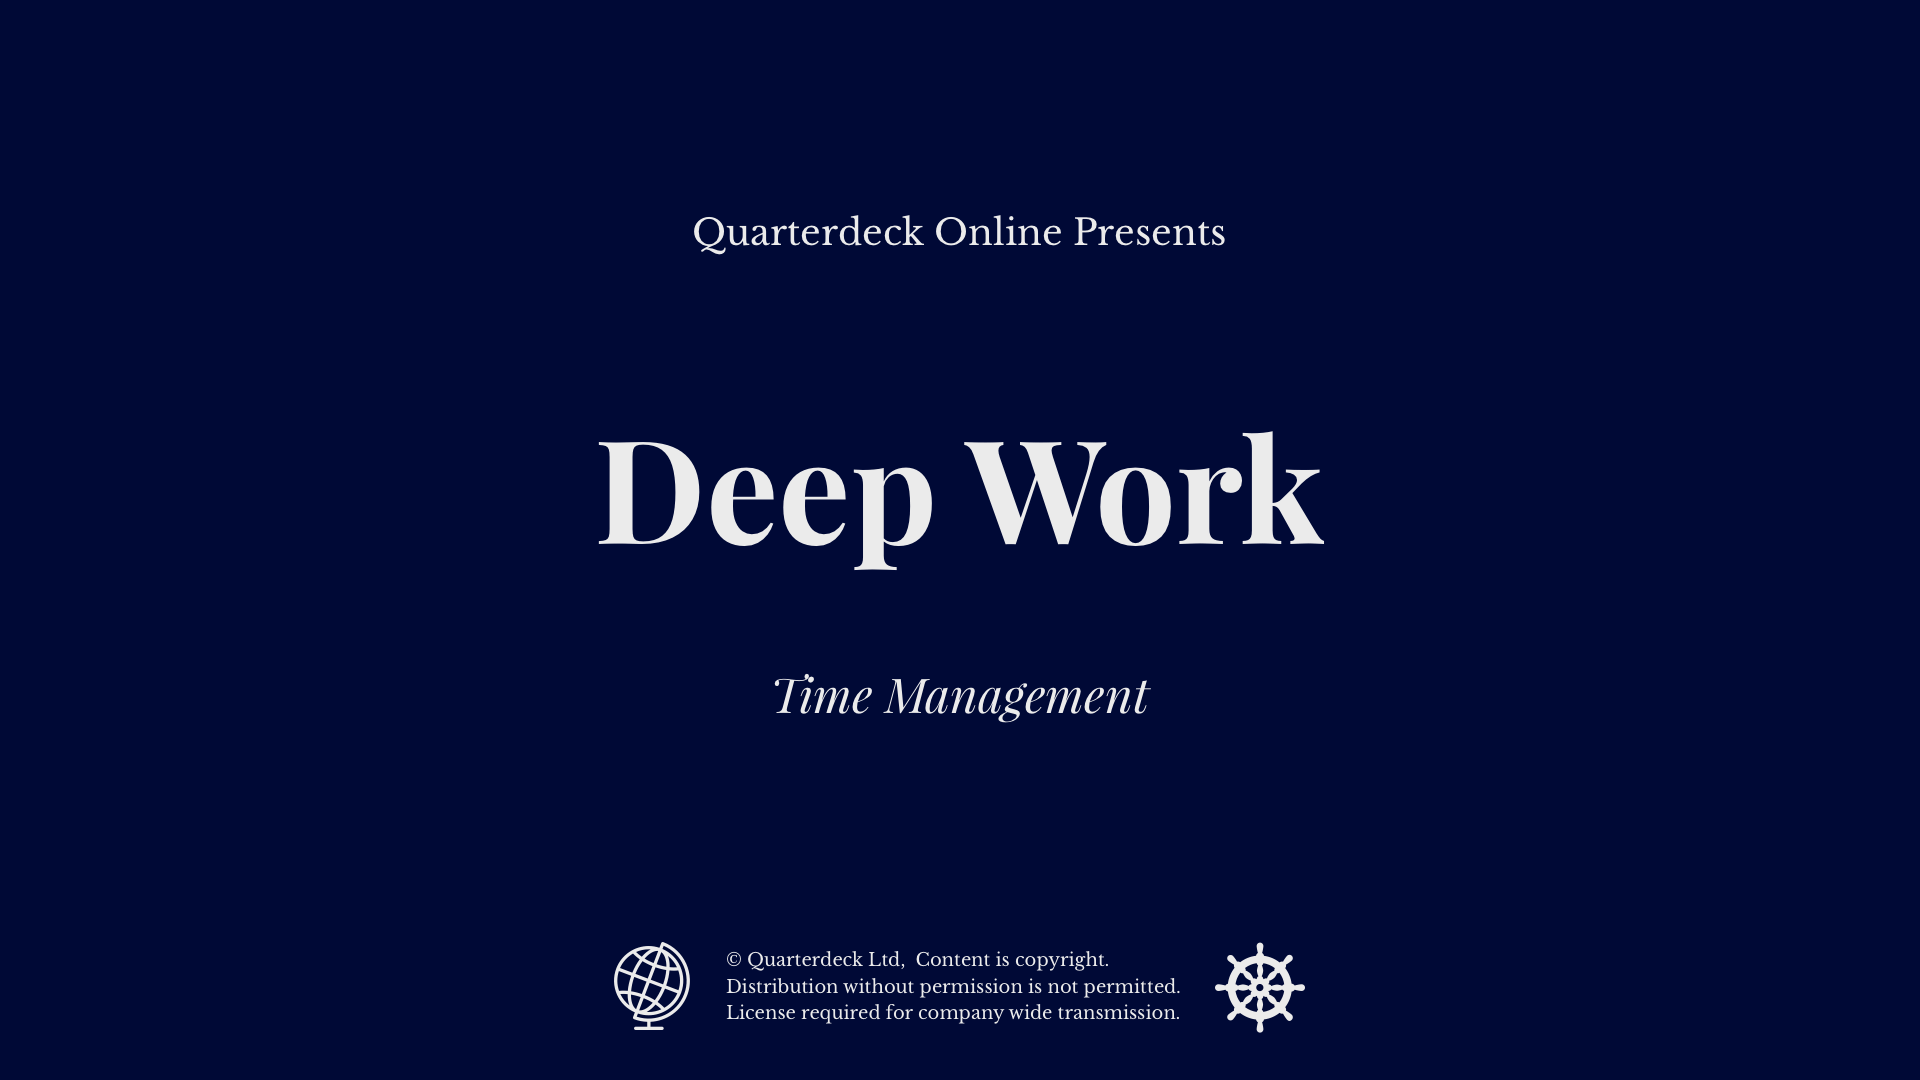 download the new Deep Work